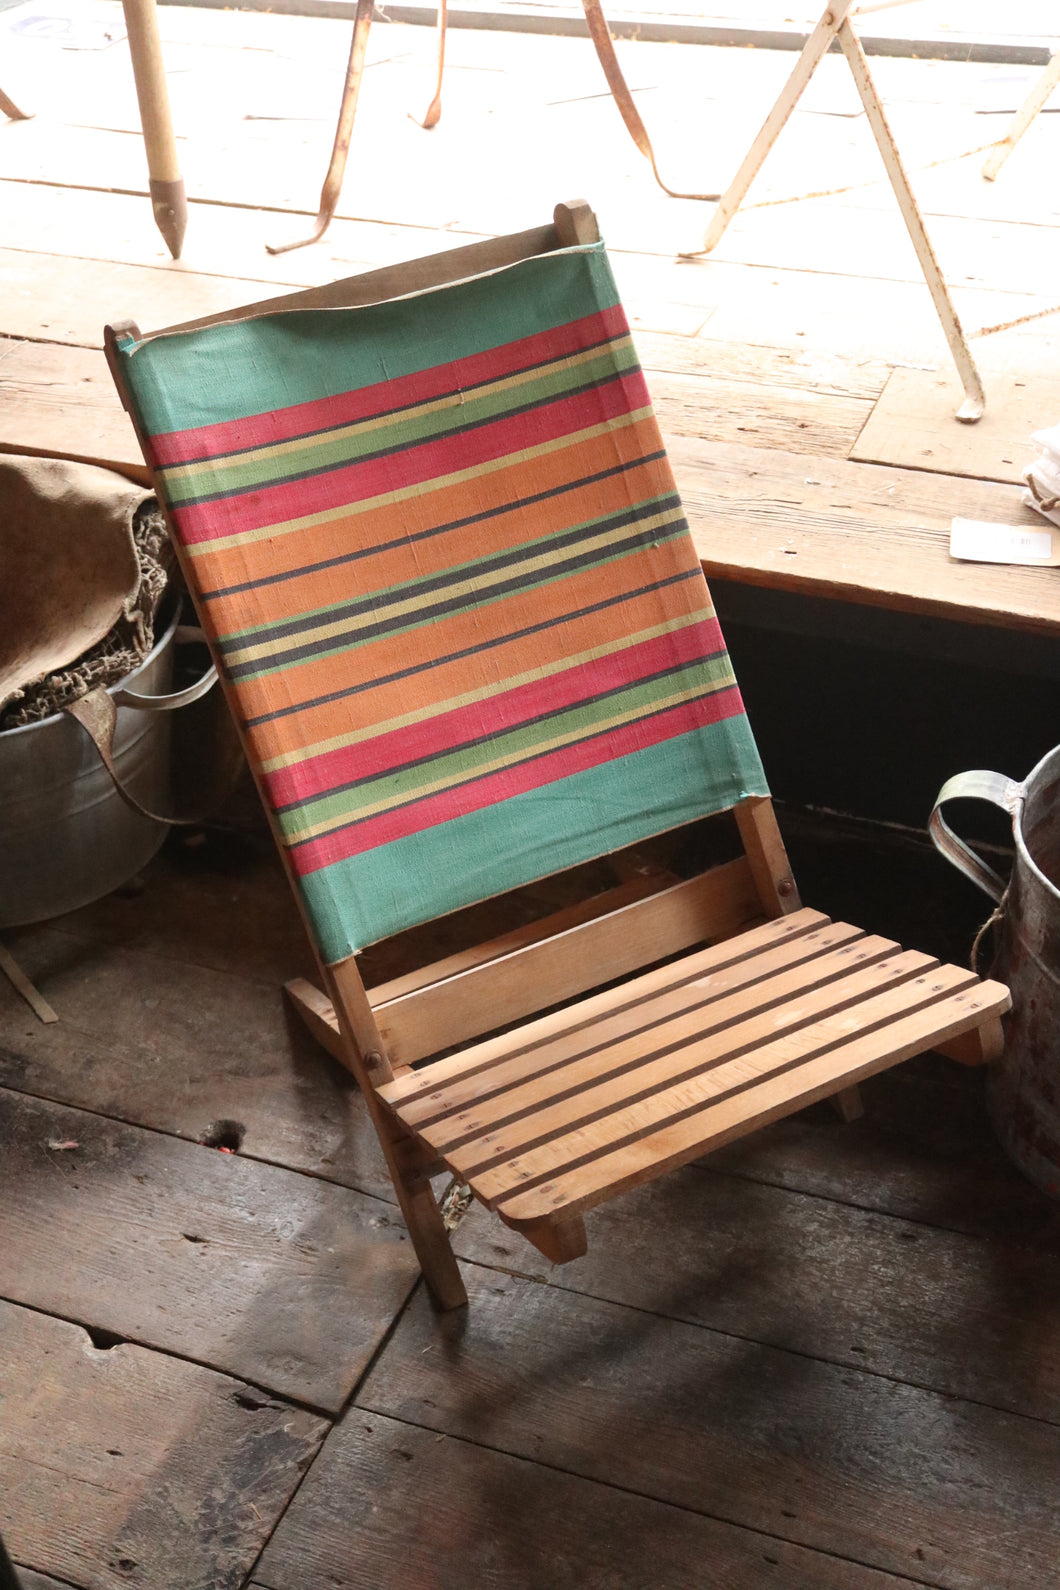 Pair of Vintage Striped Beach Chairs